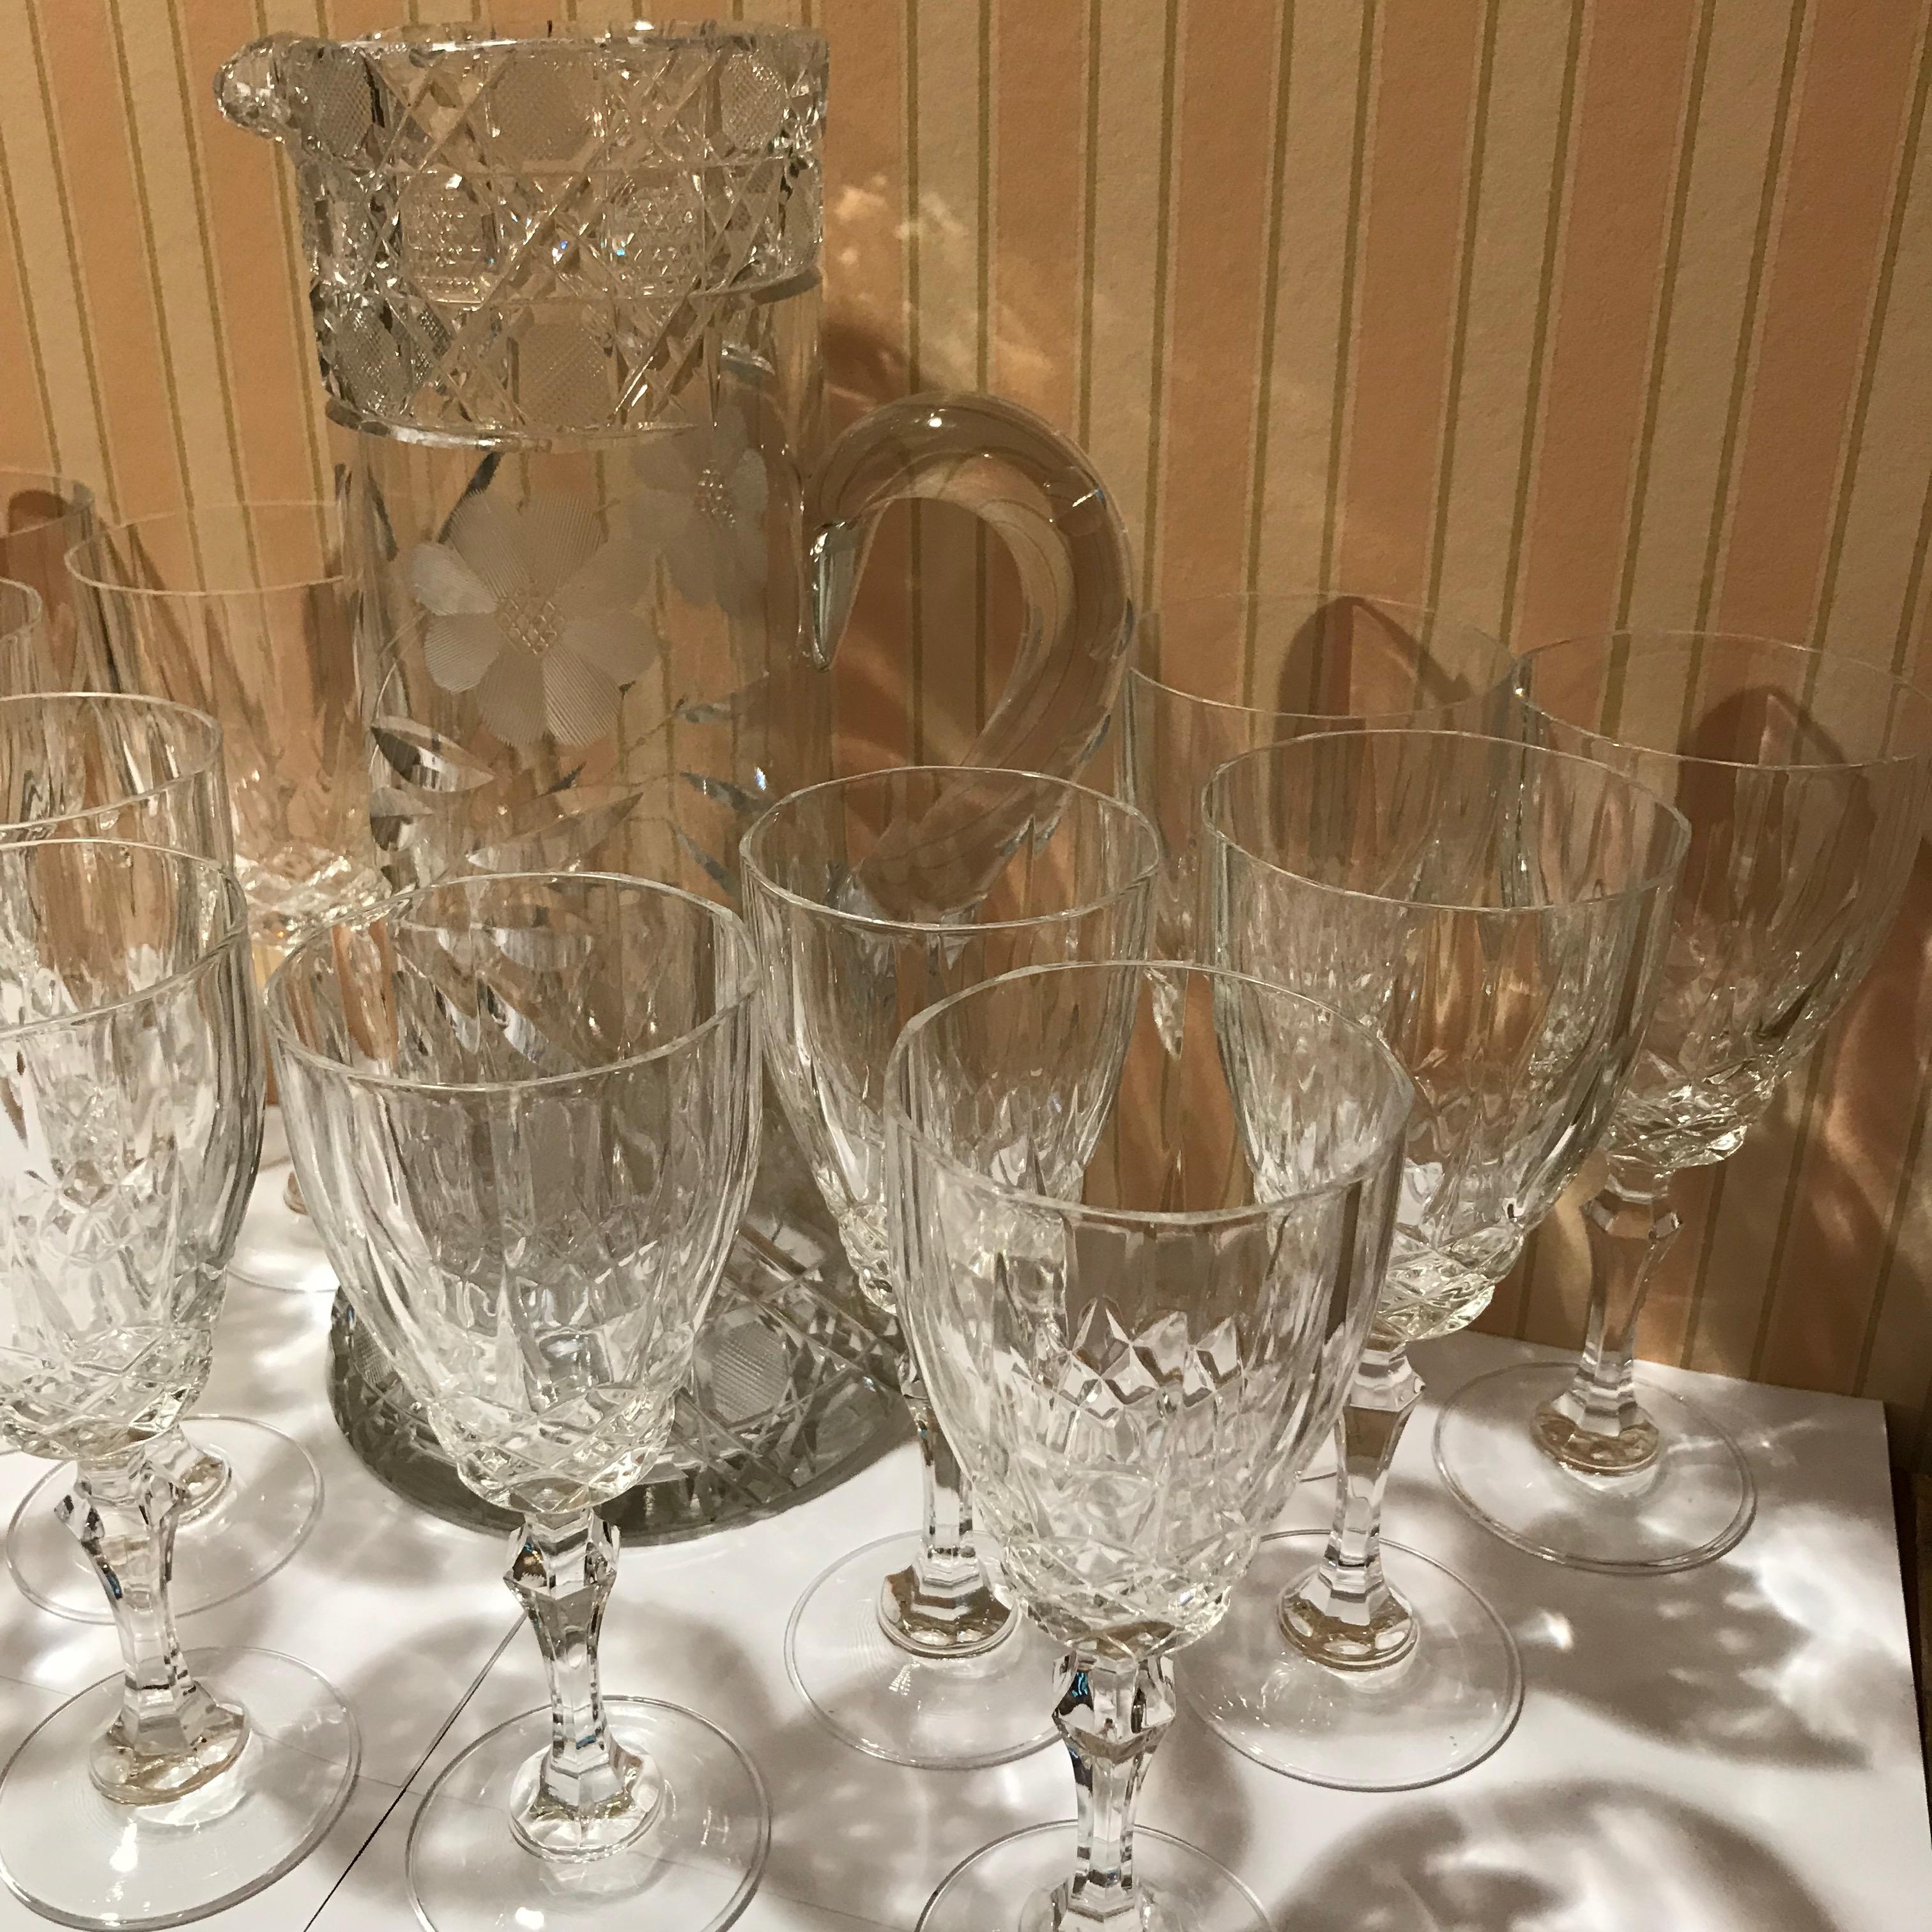 Set of 12 Cut Crystal Wine Glasses and Pitcher, 13 Pieces im Zustand „Hervorragend“ im Angebot in Washington Crossing, PA